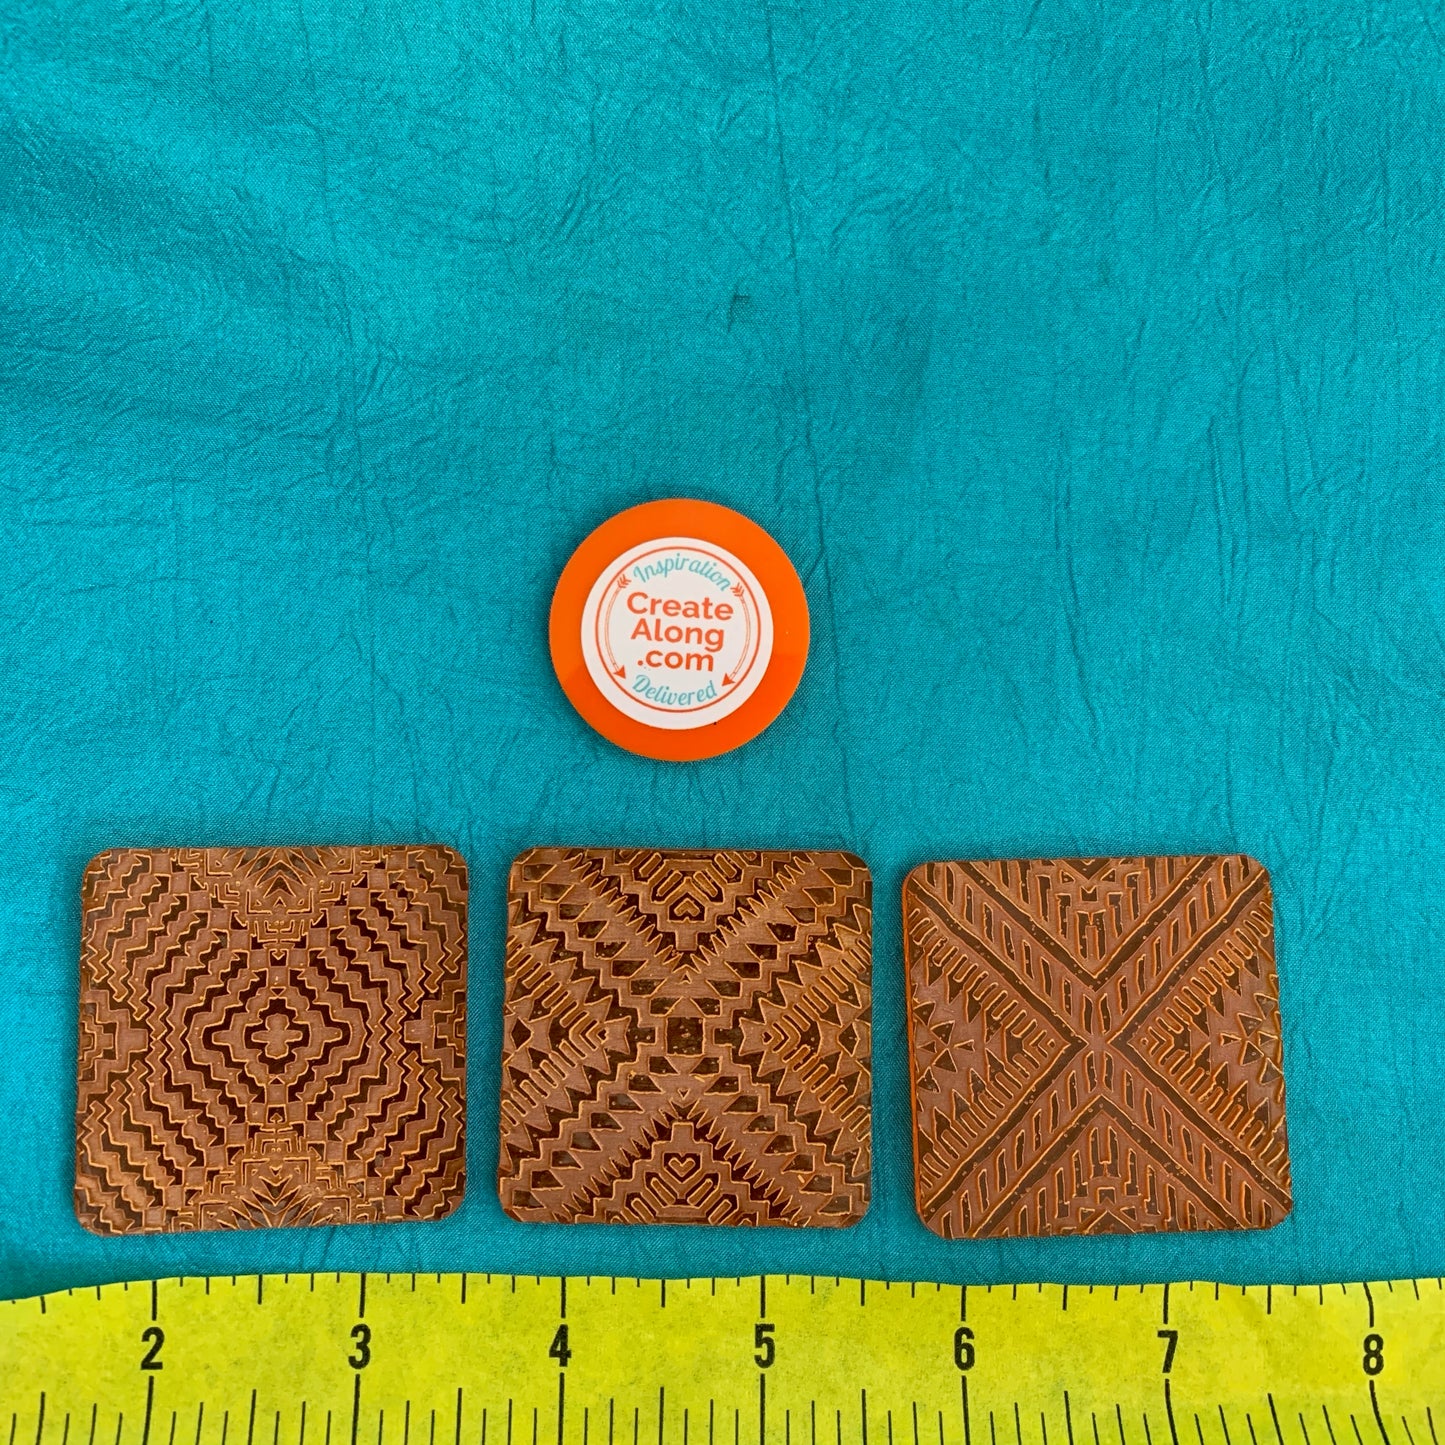 Tribal Vibes Deco Disc Tiles Stamp and Texture Pattern Designs for polymer clay